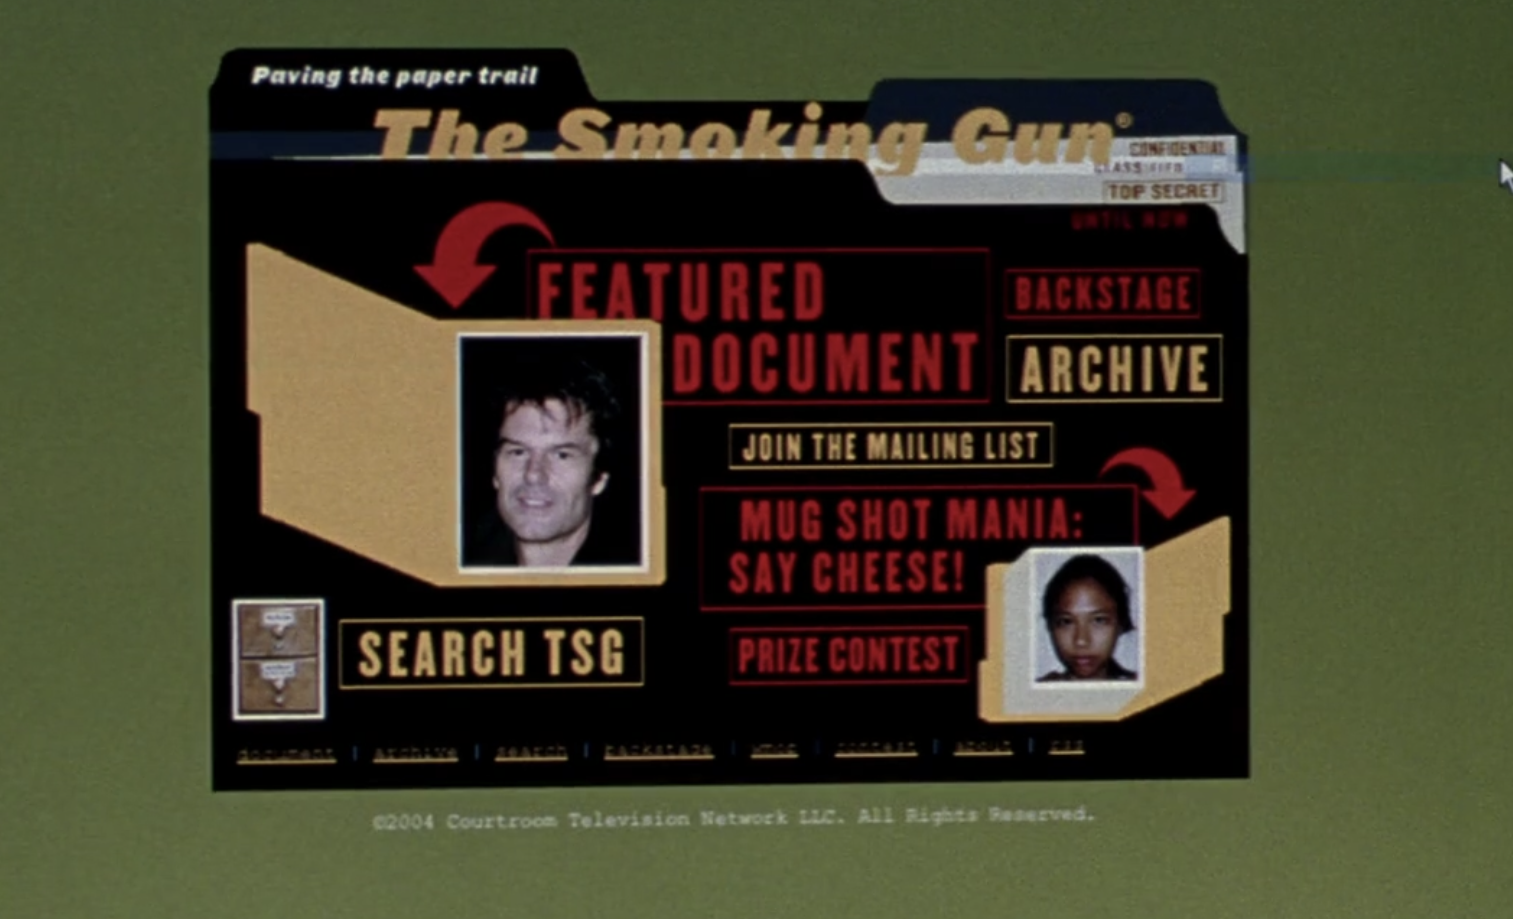 Screenshot from S1E6 of Veronica Mars. A screenshot of a computer showing the website The Smoking Gun with Aaron Echolls' photo and text reading "Featured Document."